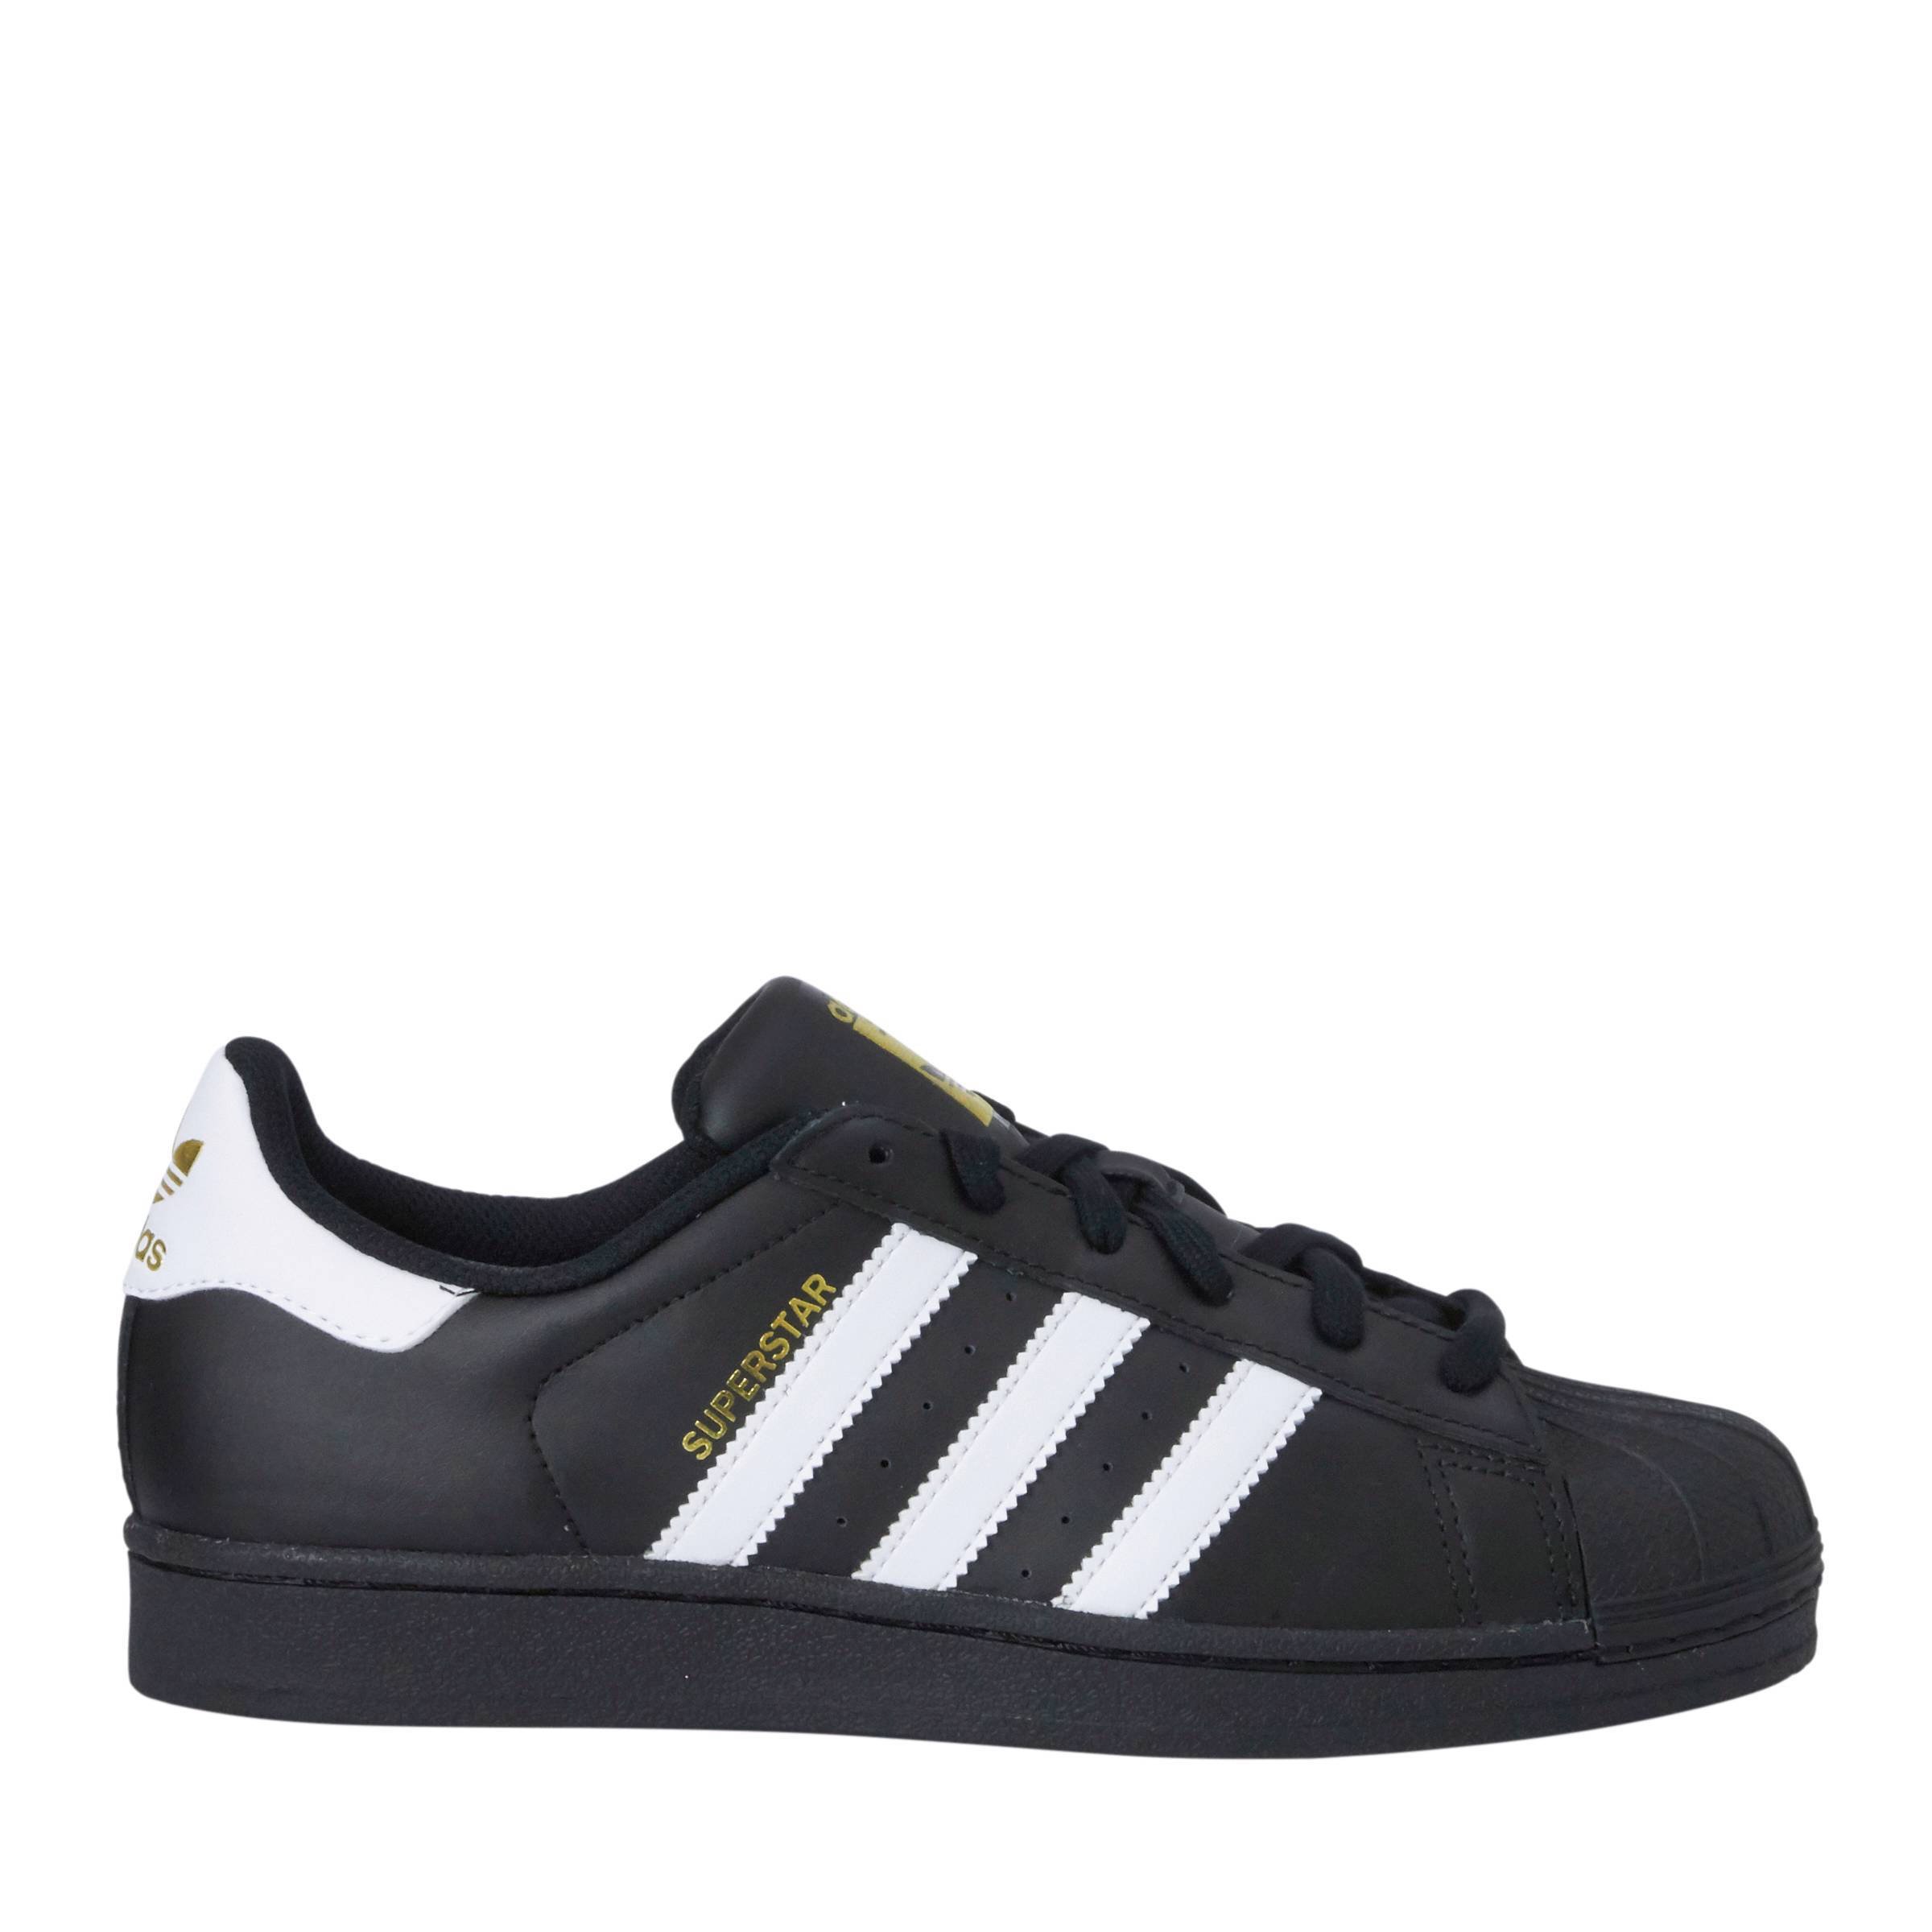 adidas superstar dames maat 40 Online shopping has never been as easy!